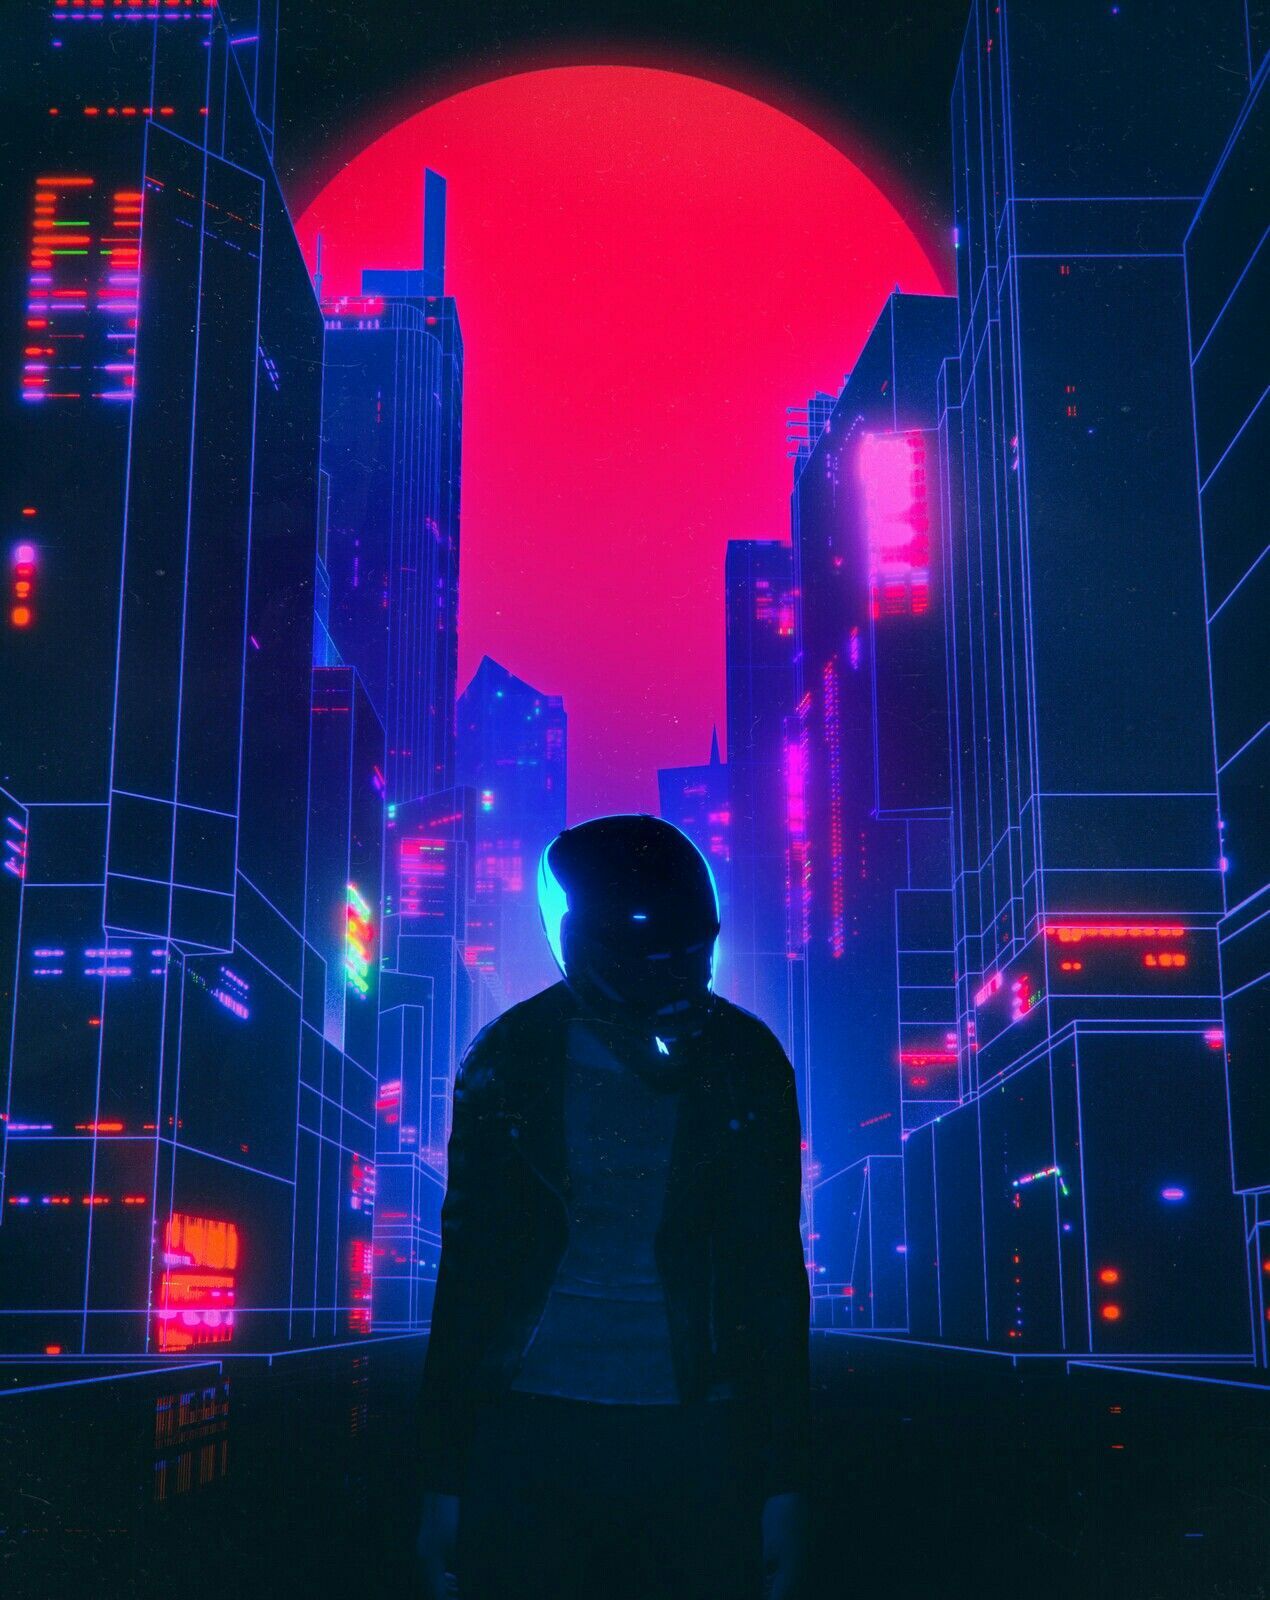 A man in a suit and helmet standing in a neon city - Cyberpunk